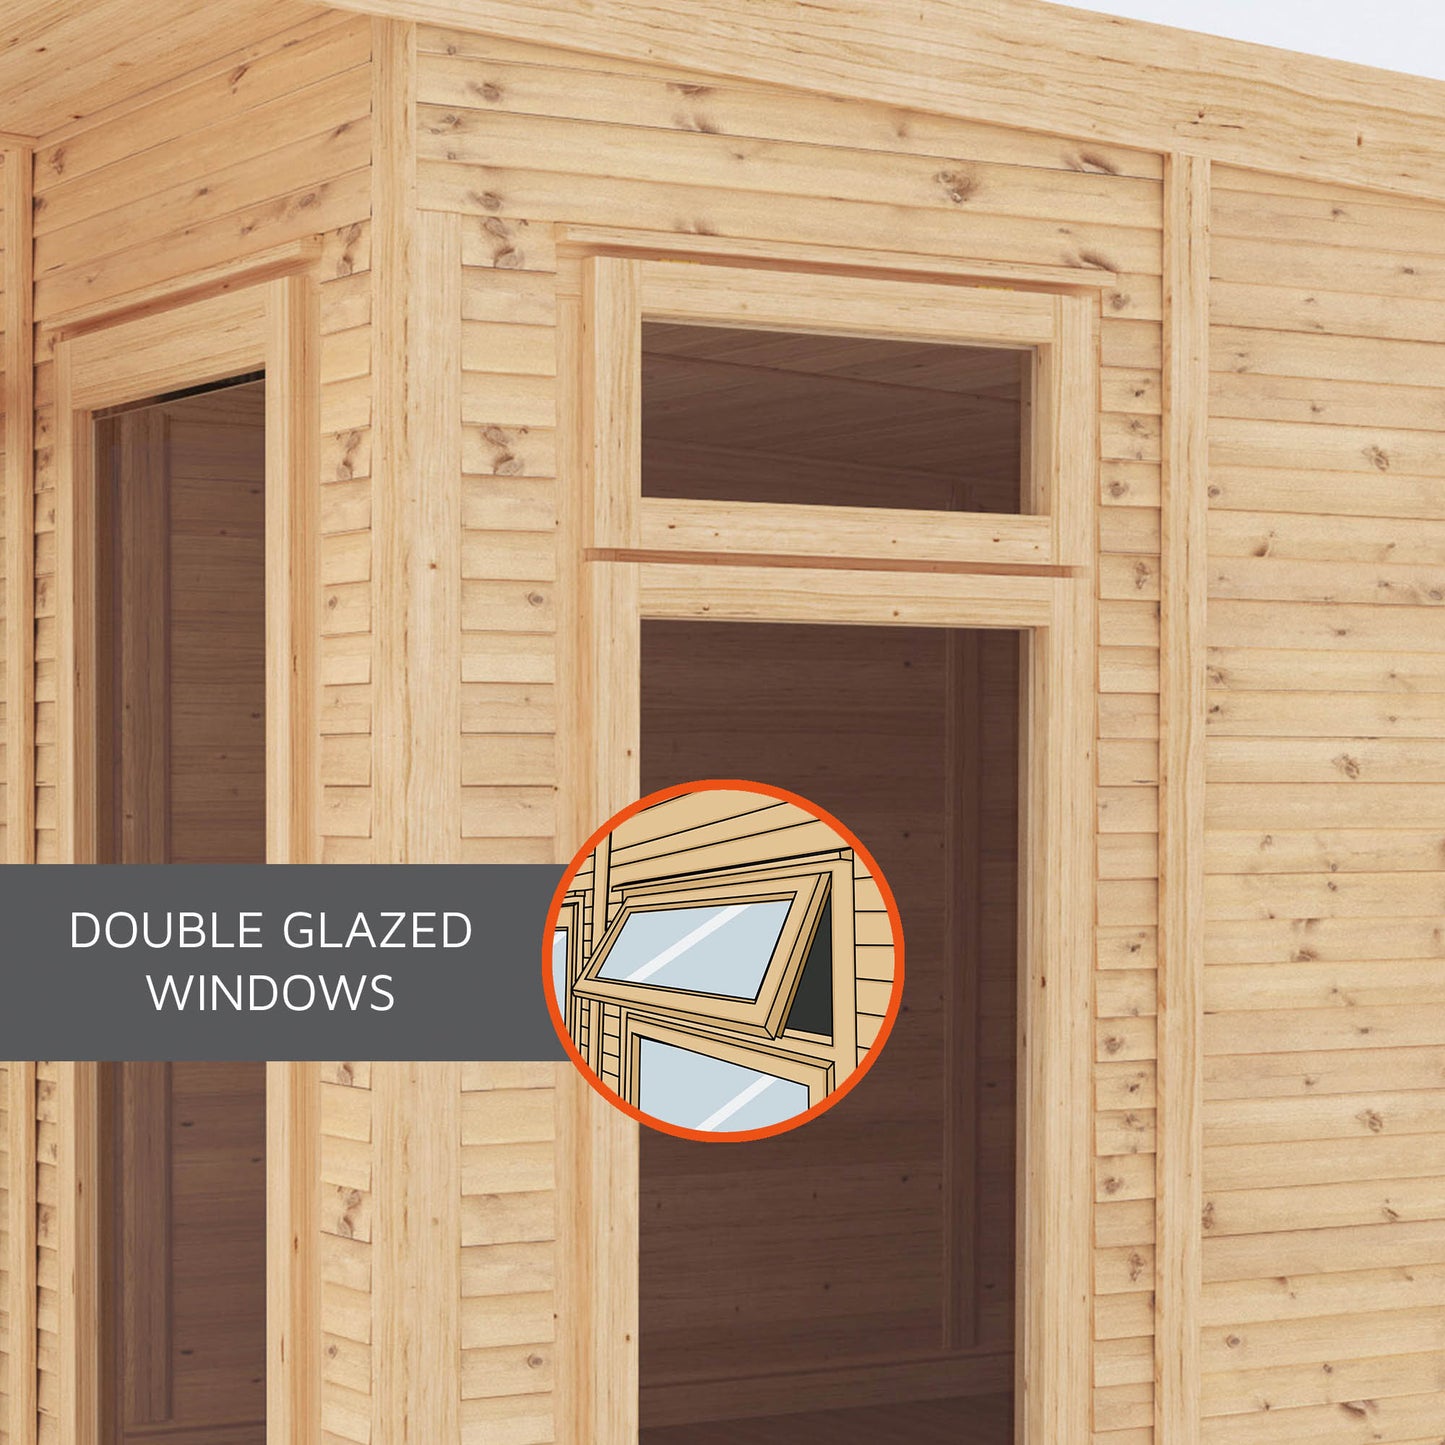 The Creswell 6m x 3m Premium Insulated Garden Room